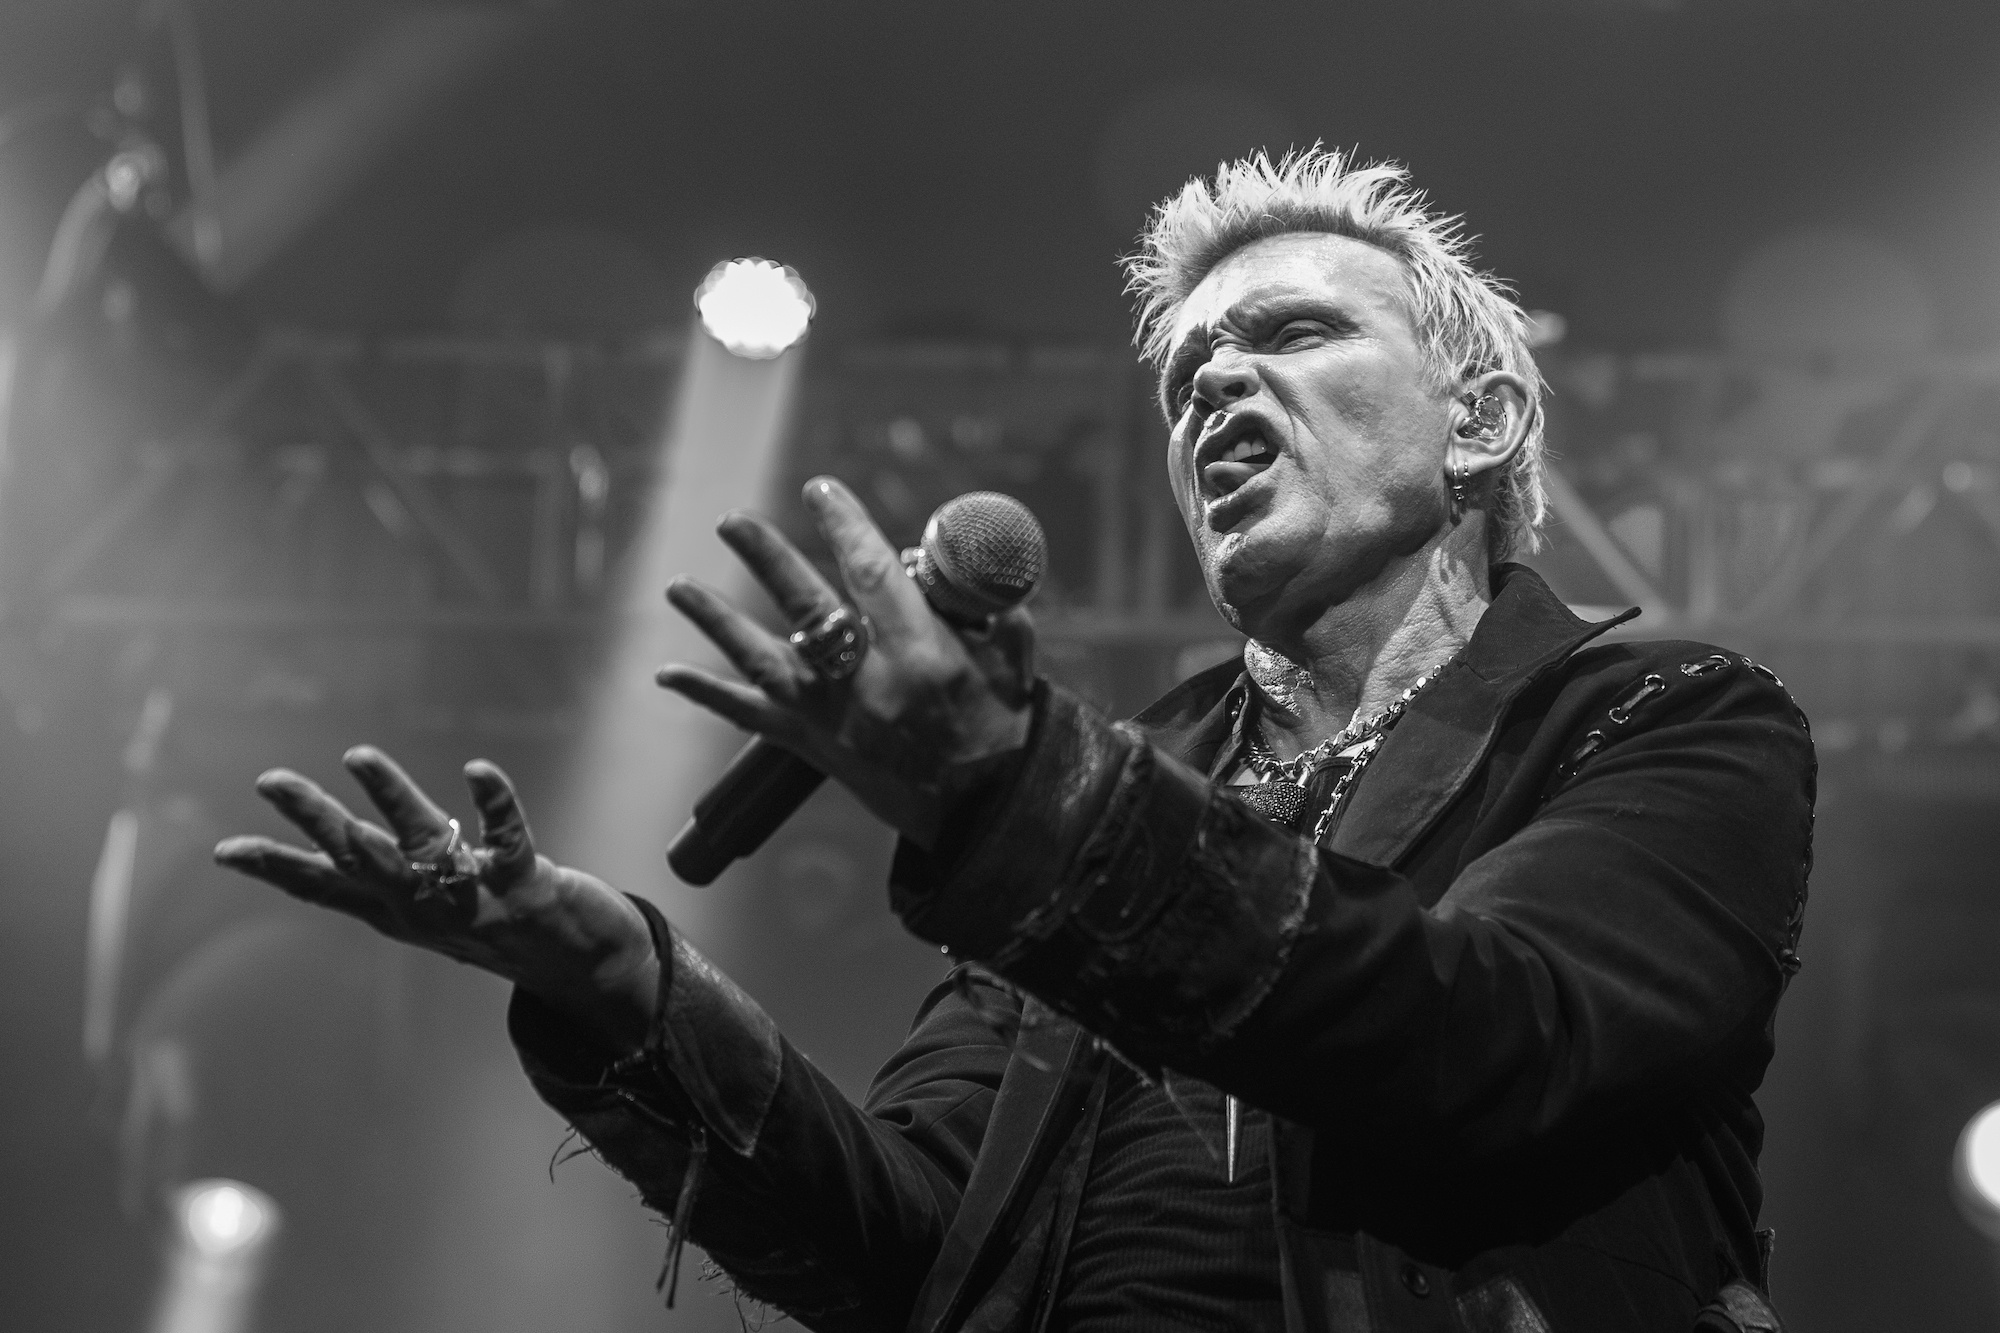 Billy Idol fans definitely not dancing by themselves at the Capitol Theatre Sept 22, 2021 Just One More Concert 2000x1340